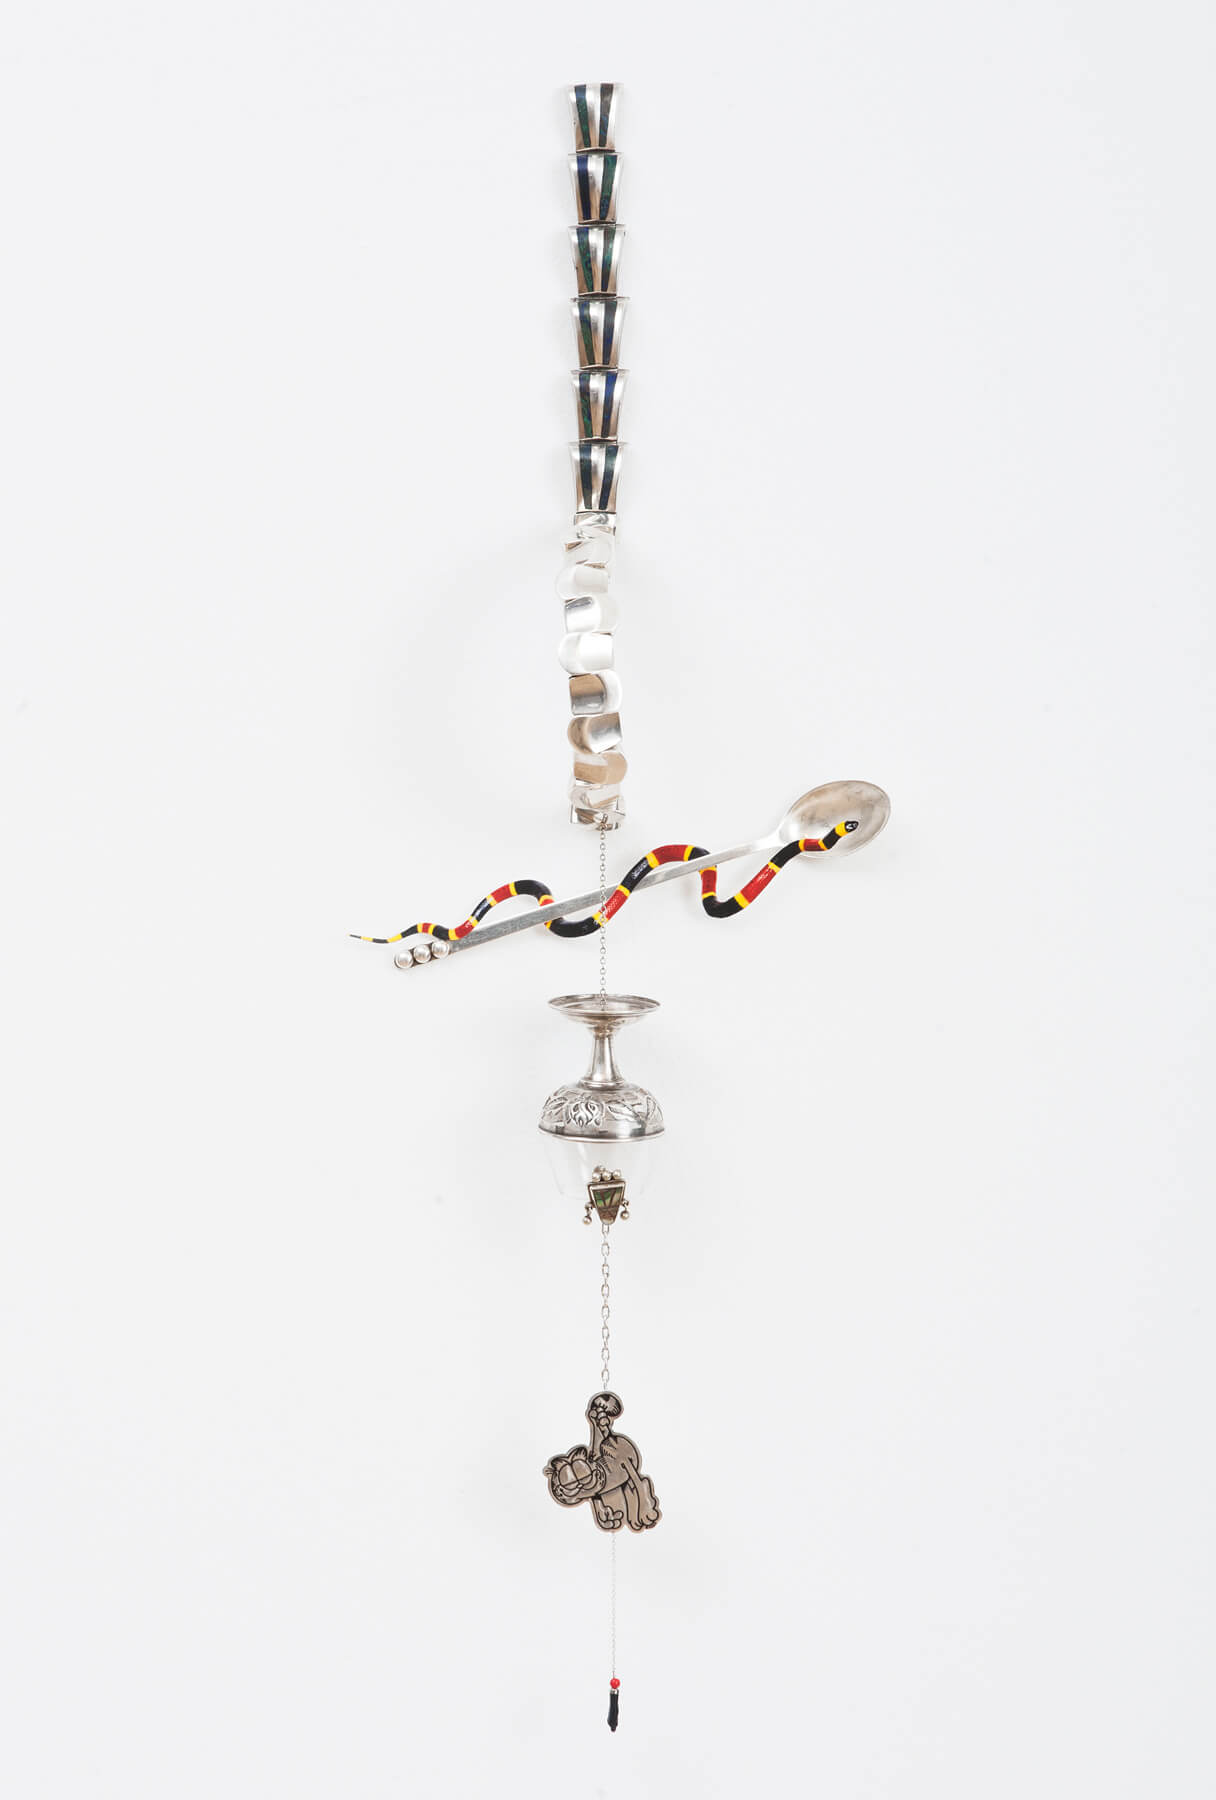 Livia Corona Benjamin
                                        'Rx (Red and Yellow Kills a Fellow)', 2015
                                         26 x 9 x 3 Inches
                                        Antonio Pineda Silver Thumbprint Bracelet, Enrique Ledesma Silver and green Lapis Lazuli bracelet, silver spoon, photographic print, silver and glass goblet, abalone shell earring, Garfield pendant, silver chains, plastic figa
                                        